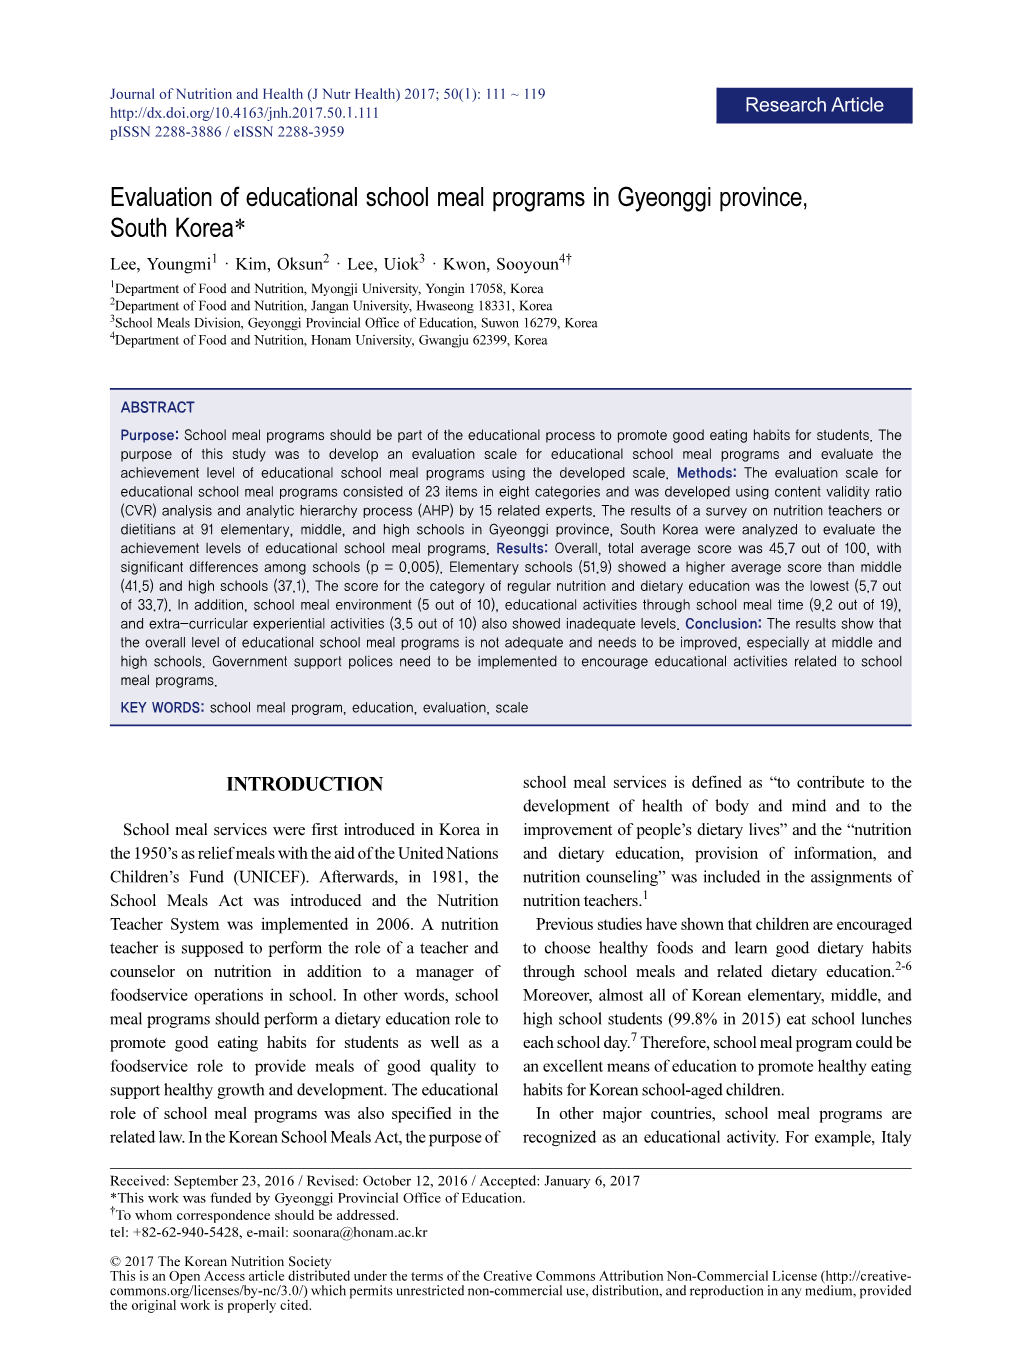 Evaluation of Educational School Meal Programs in Gyeonggi Province